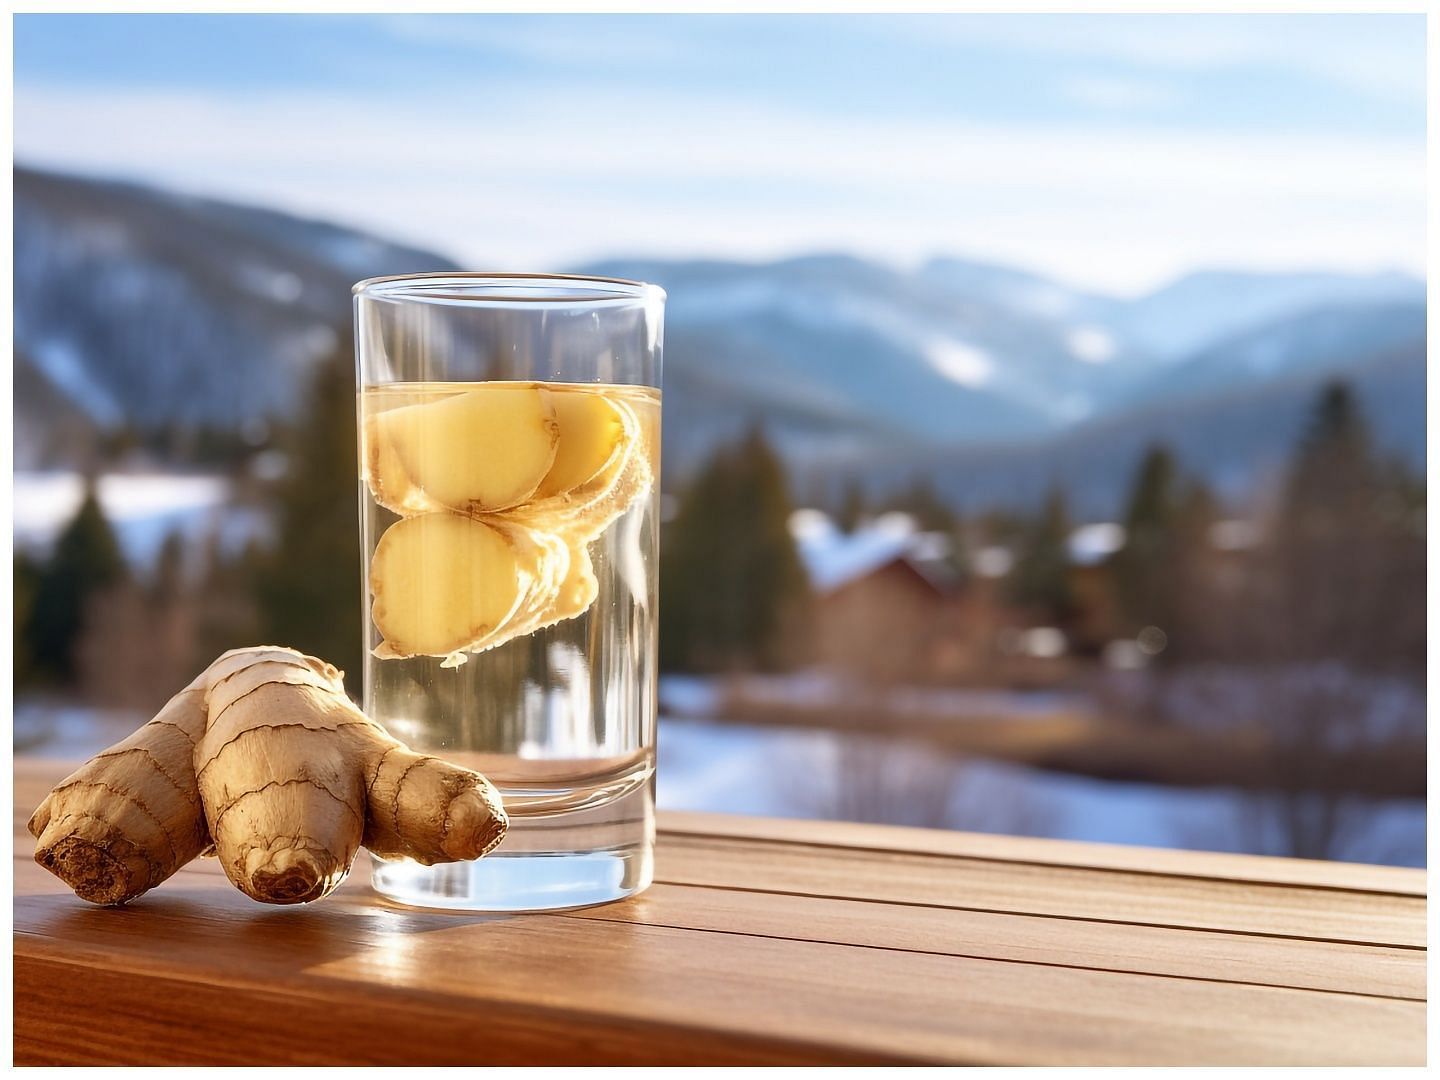 Ginger water improves blood circulation (Image via Vecteezy)